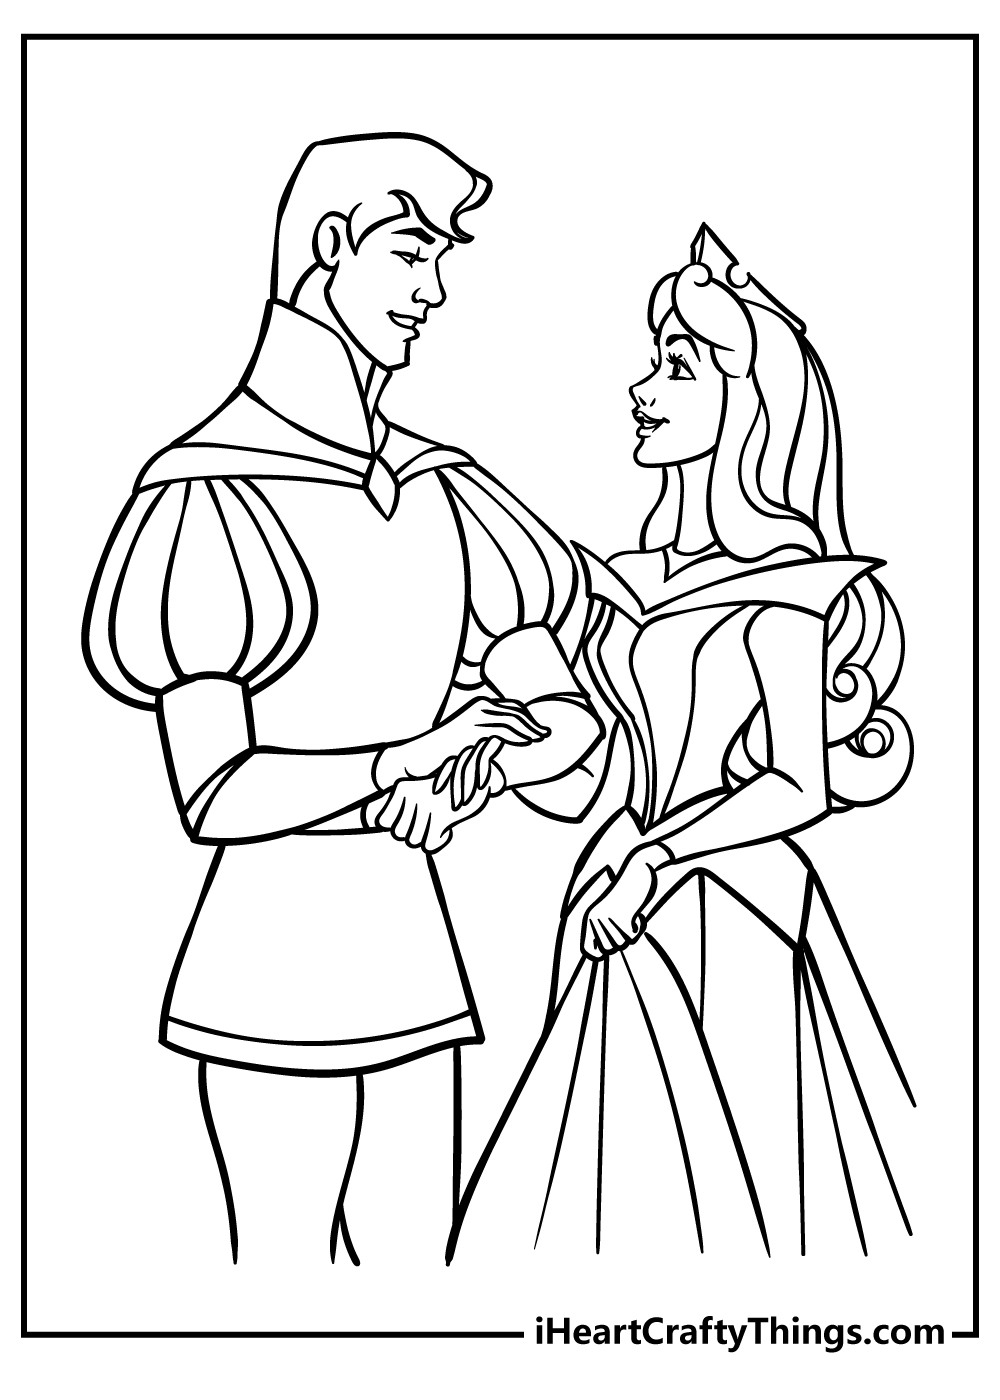 Sleeping Beauty Coloring Book for kids free printable